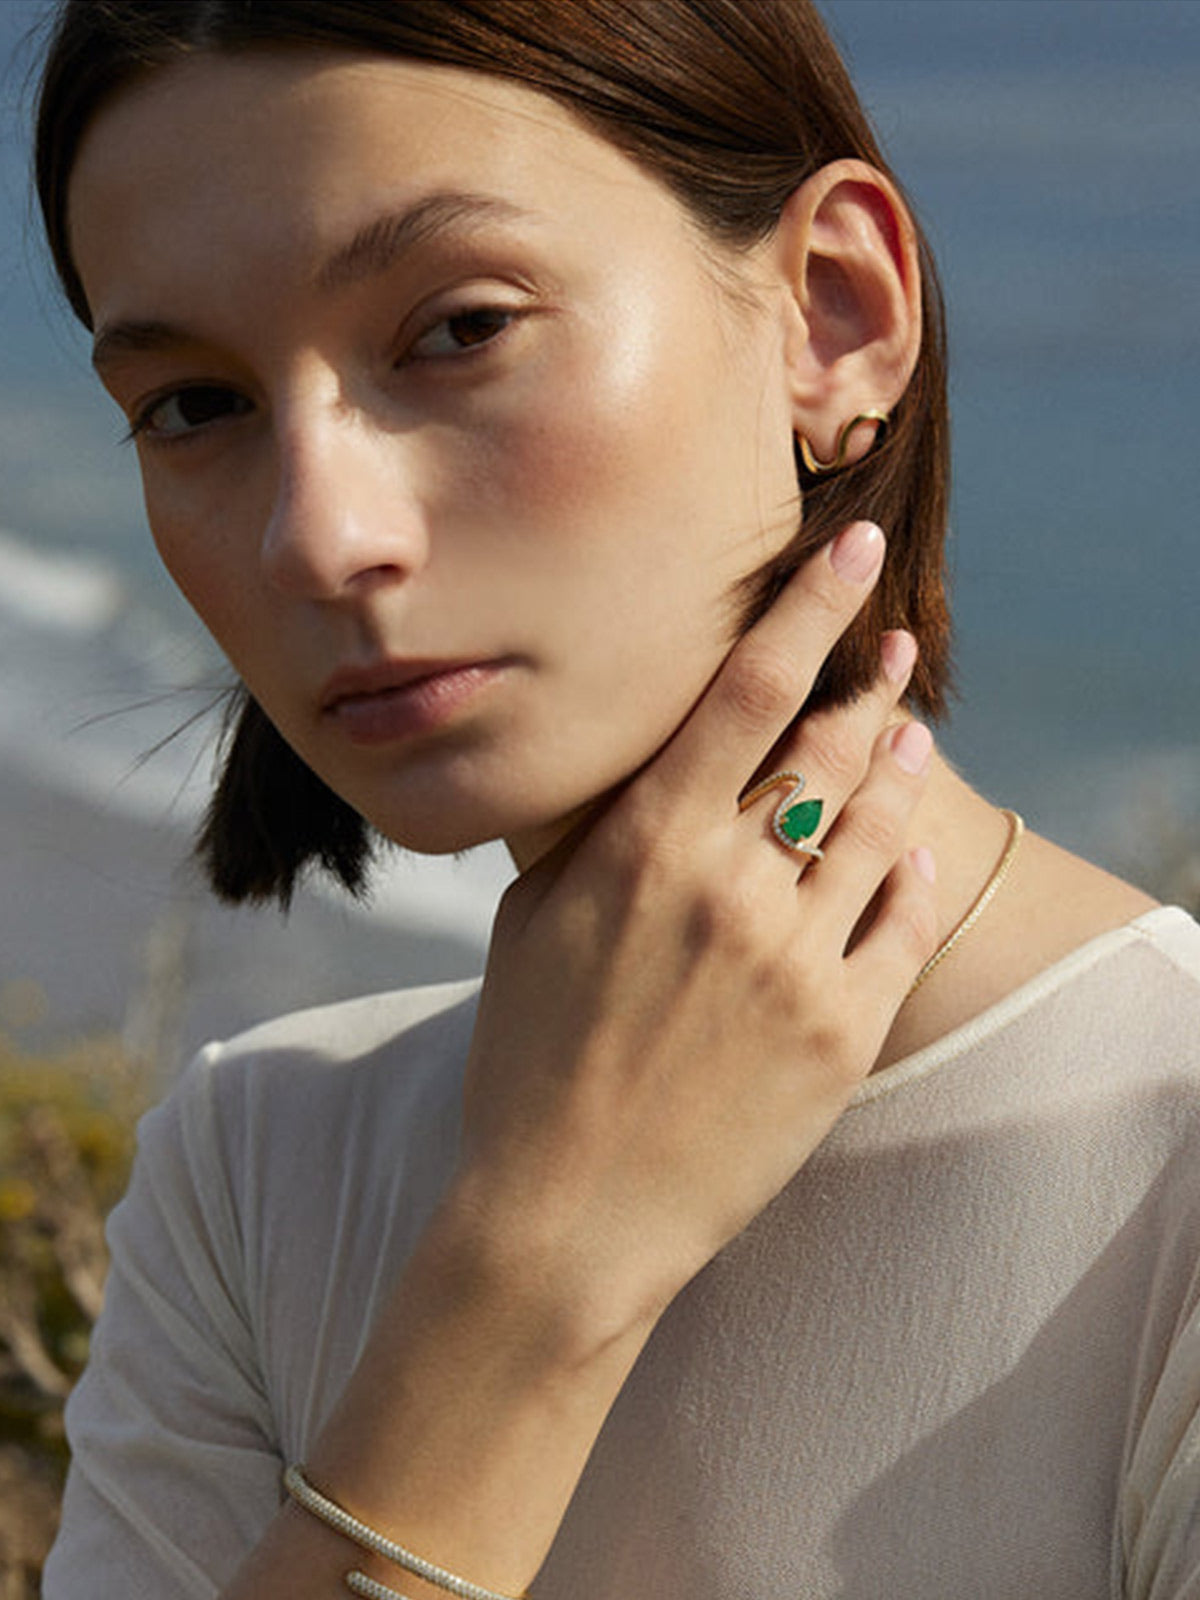 Floating Emerald Trace Pavé Ring